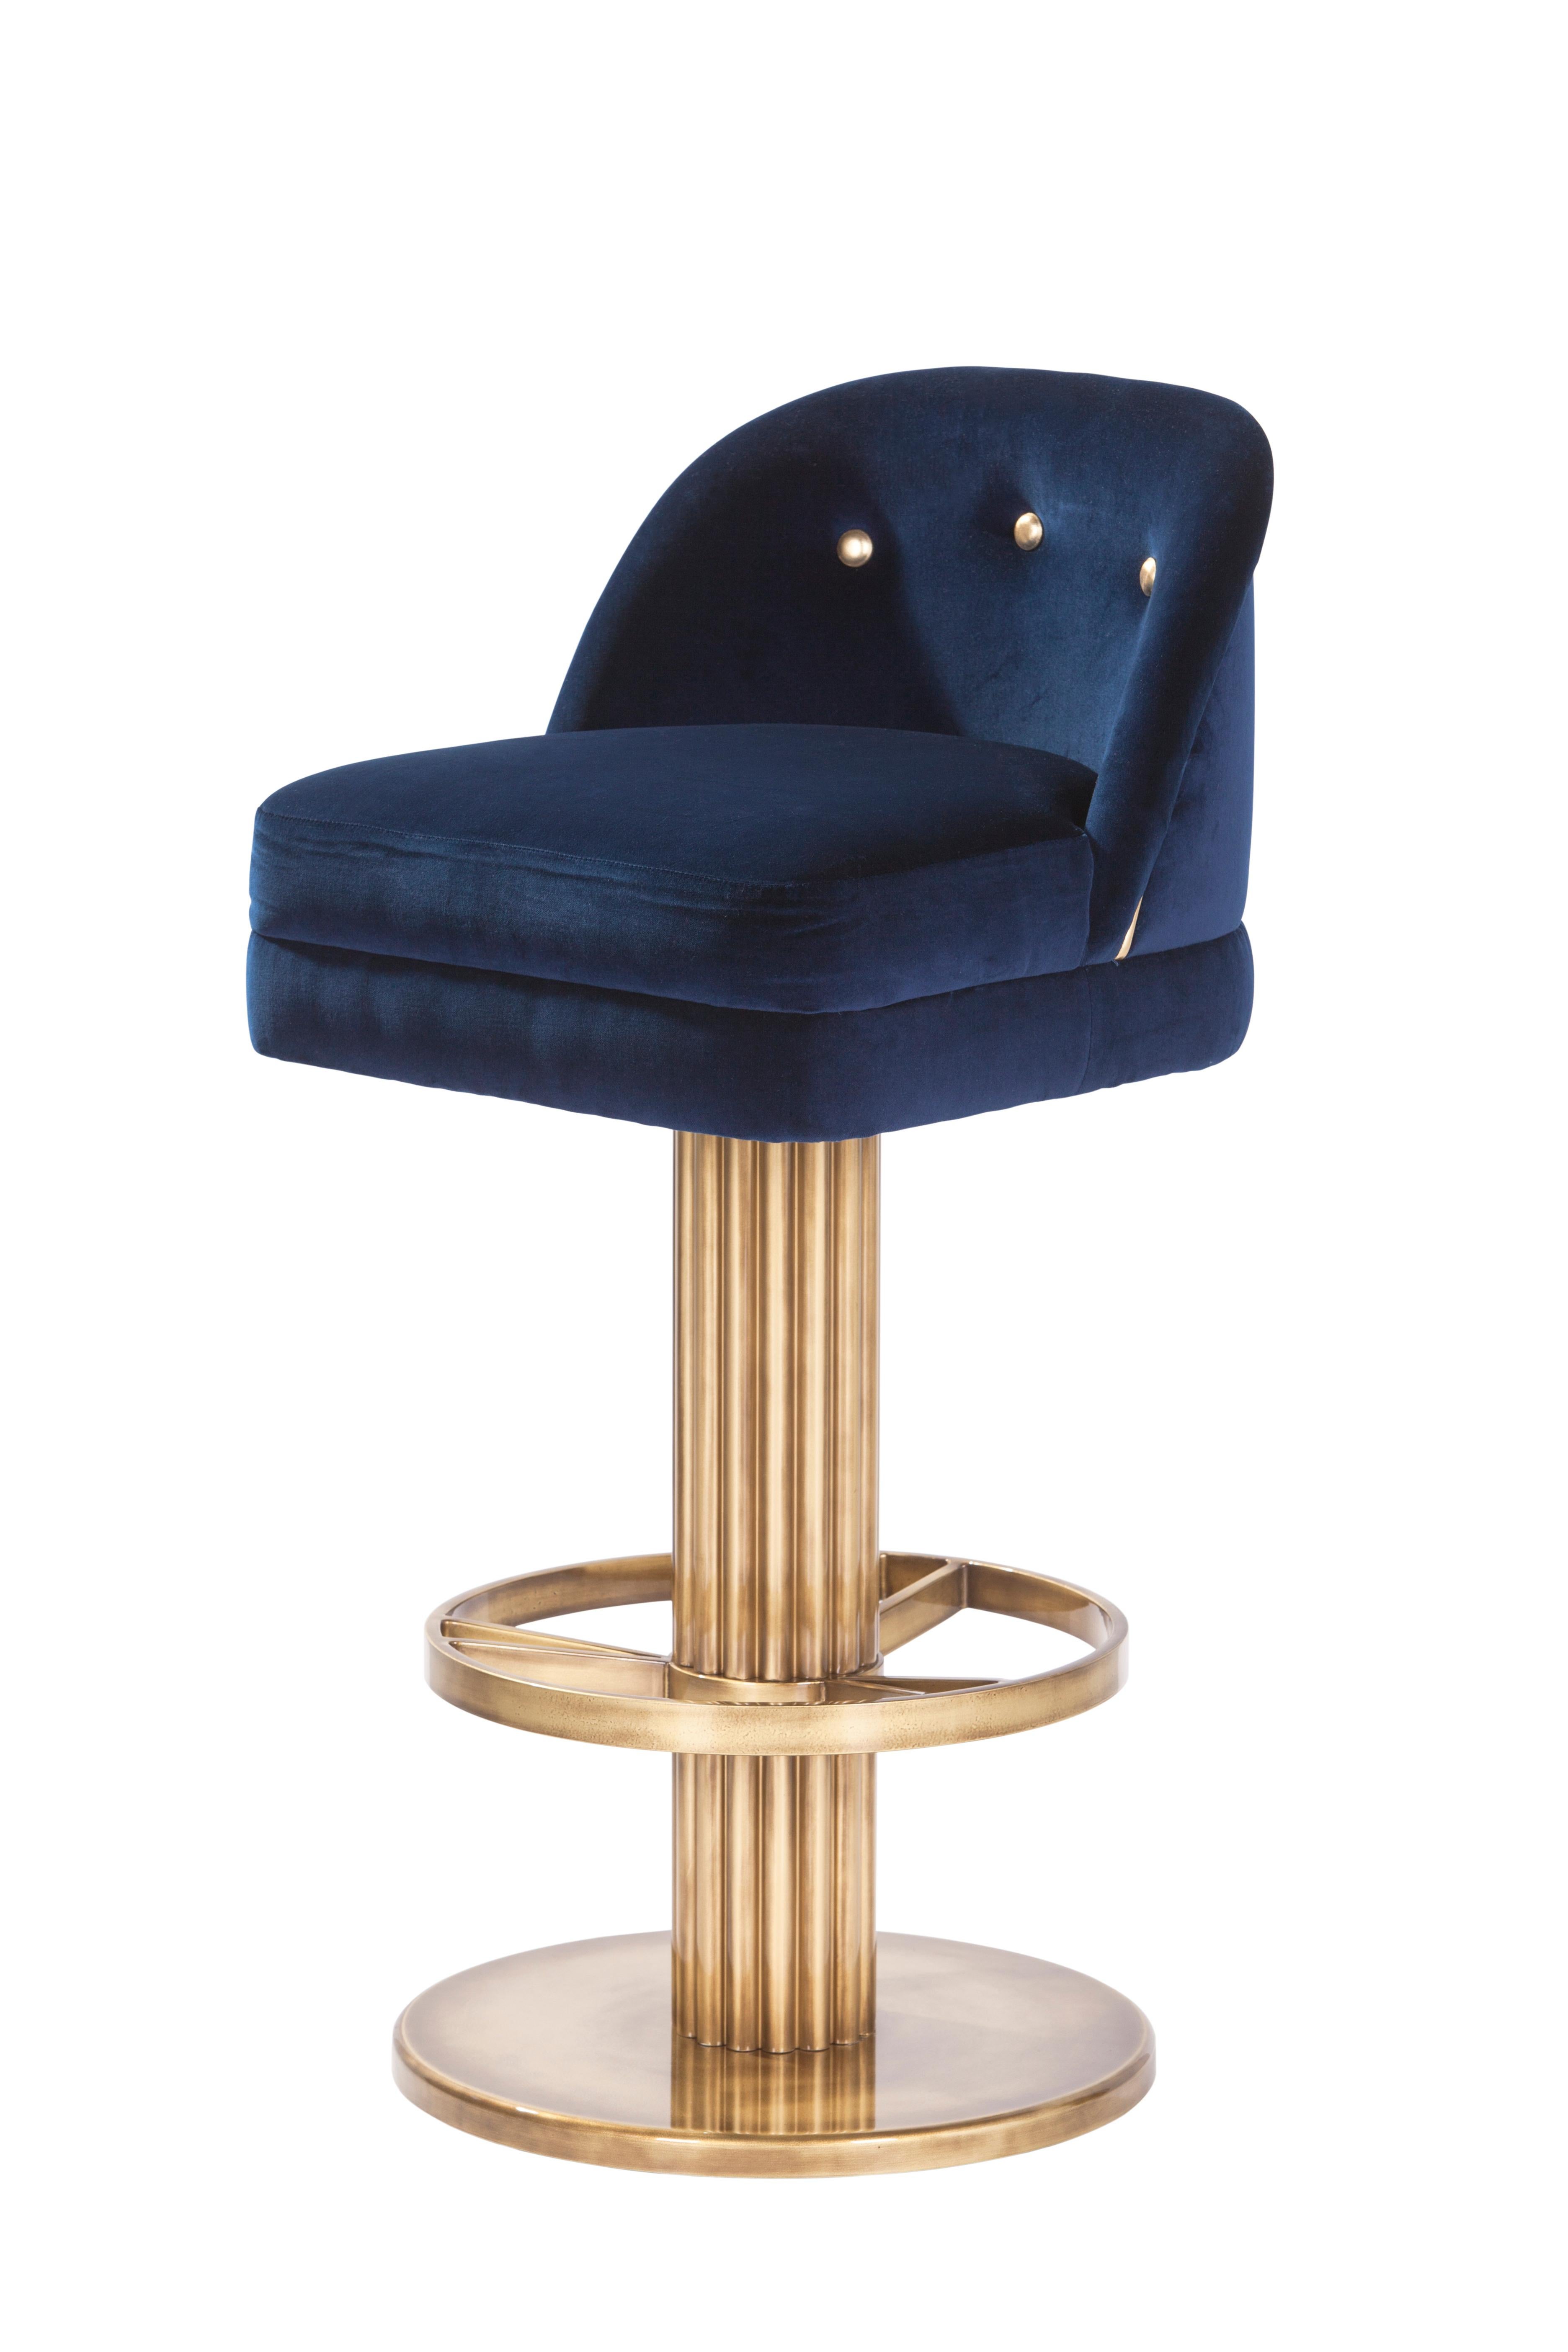 Art Deco Flute bar stool, Handcrafted in Portugal - Europe by Greenapple.

Flute bar stool embodies simplicity and comfort for relaxing moments, without forgetting that the small details make all the difference. Handcrafted with dark blue velvet,